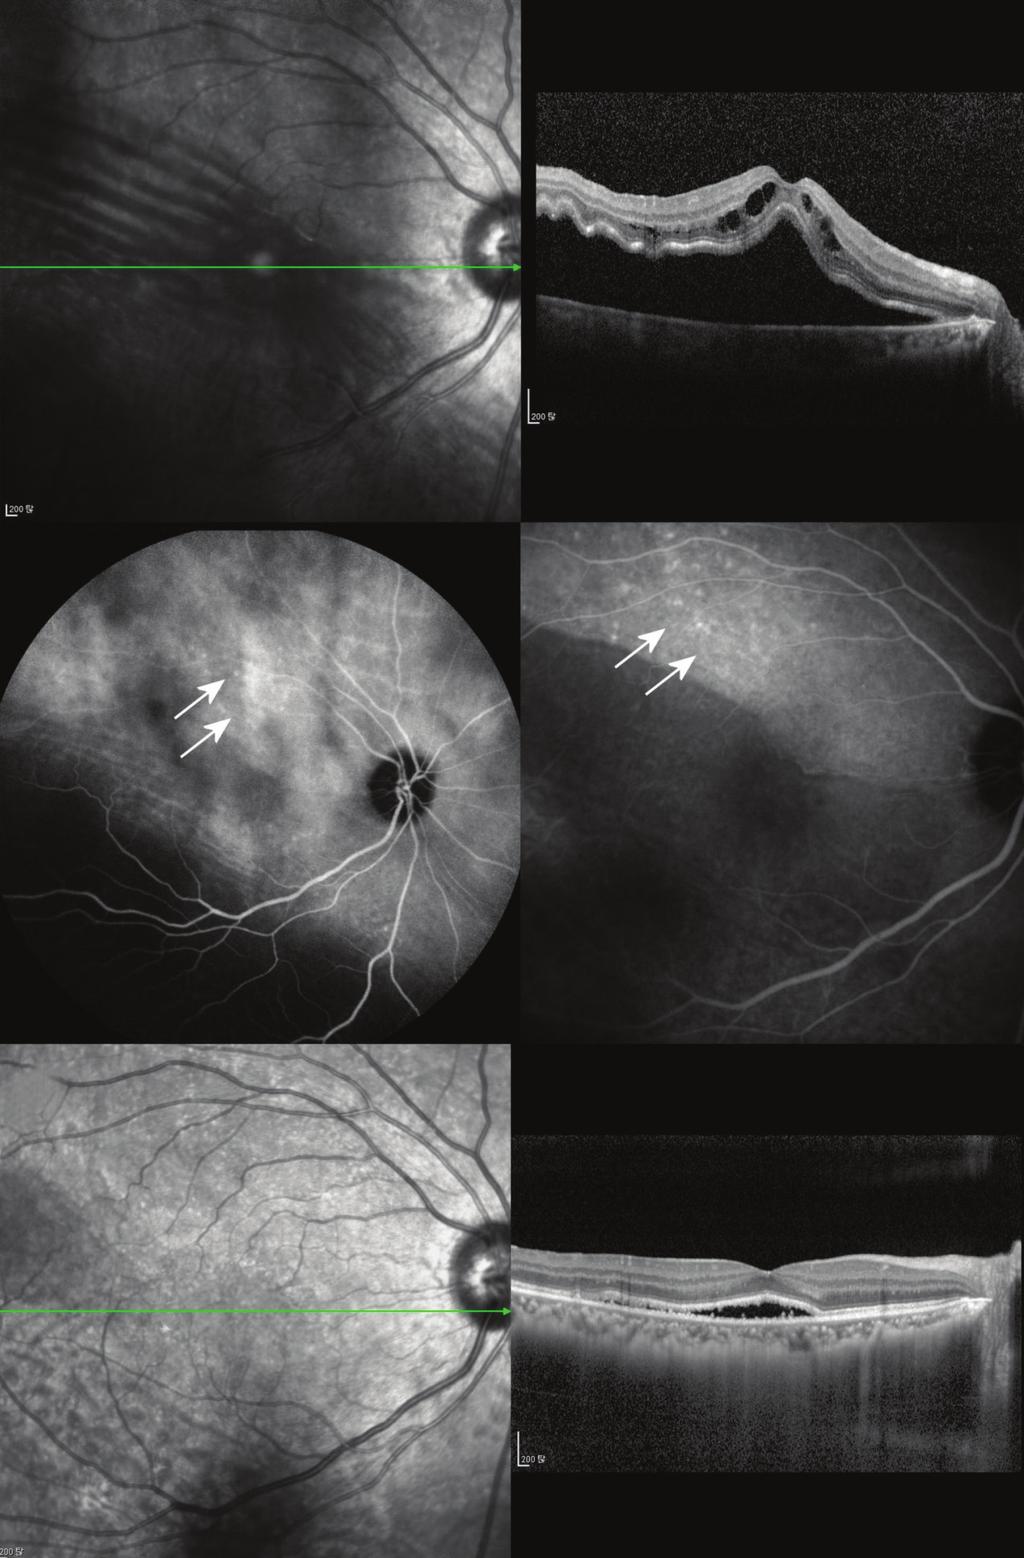 Korean J Ophthalmol Vol.31, No.5, 2017 A B A C D Fig. 1. A case with delayed absorption of subretinal fluid (case 9).